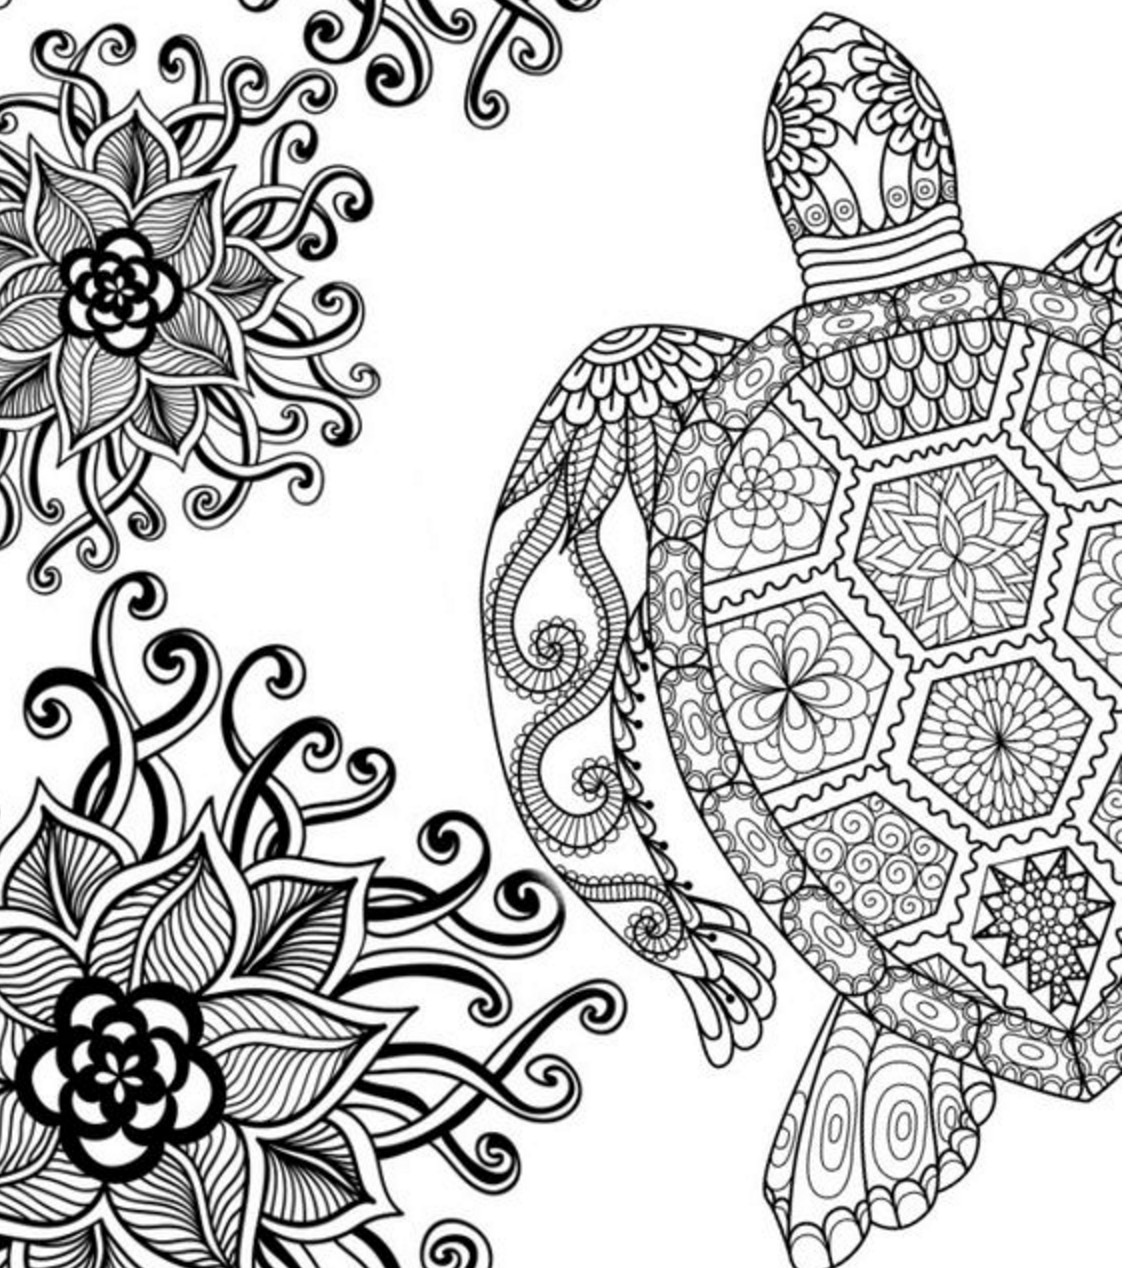 Adult Coloring Pages Free Printable
 20 Free Adult Colouring Pages The Organised Housewife